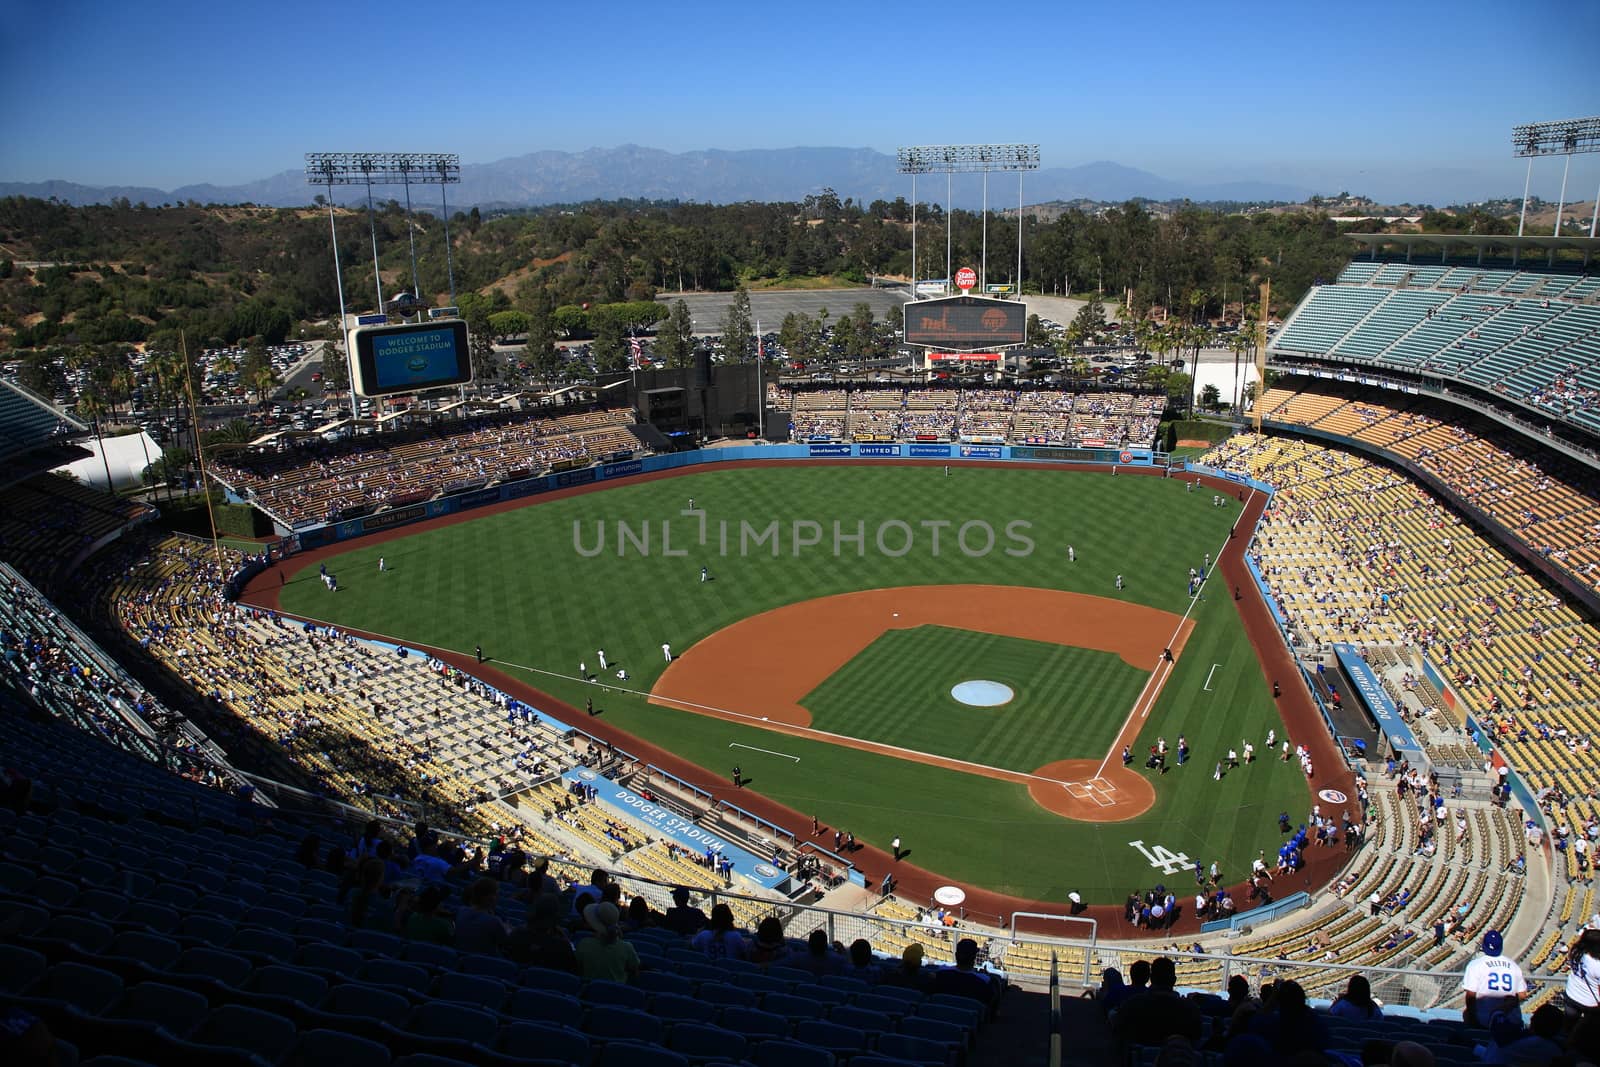 Dodger Stadium on a sunny day in Los Angeles before a baseball game.